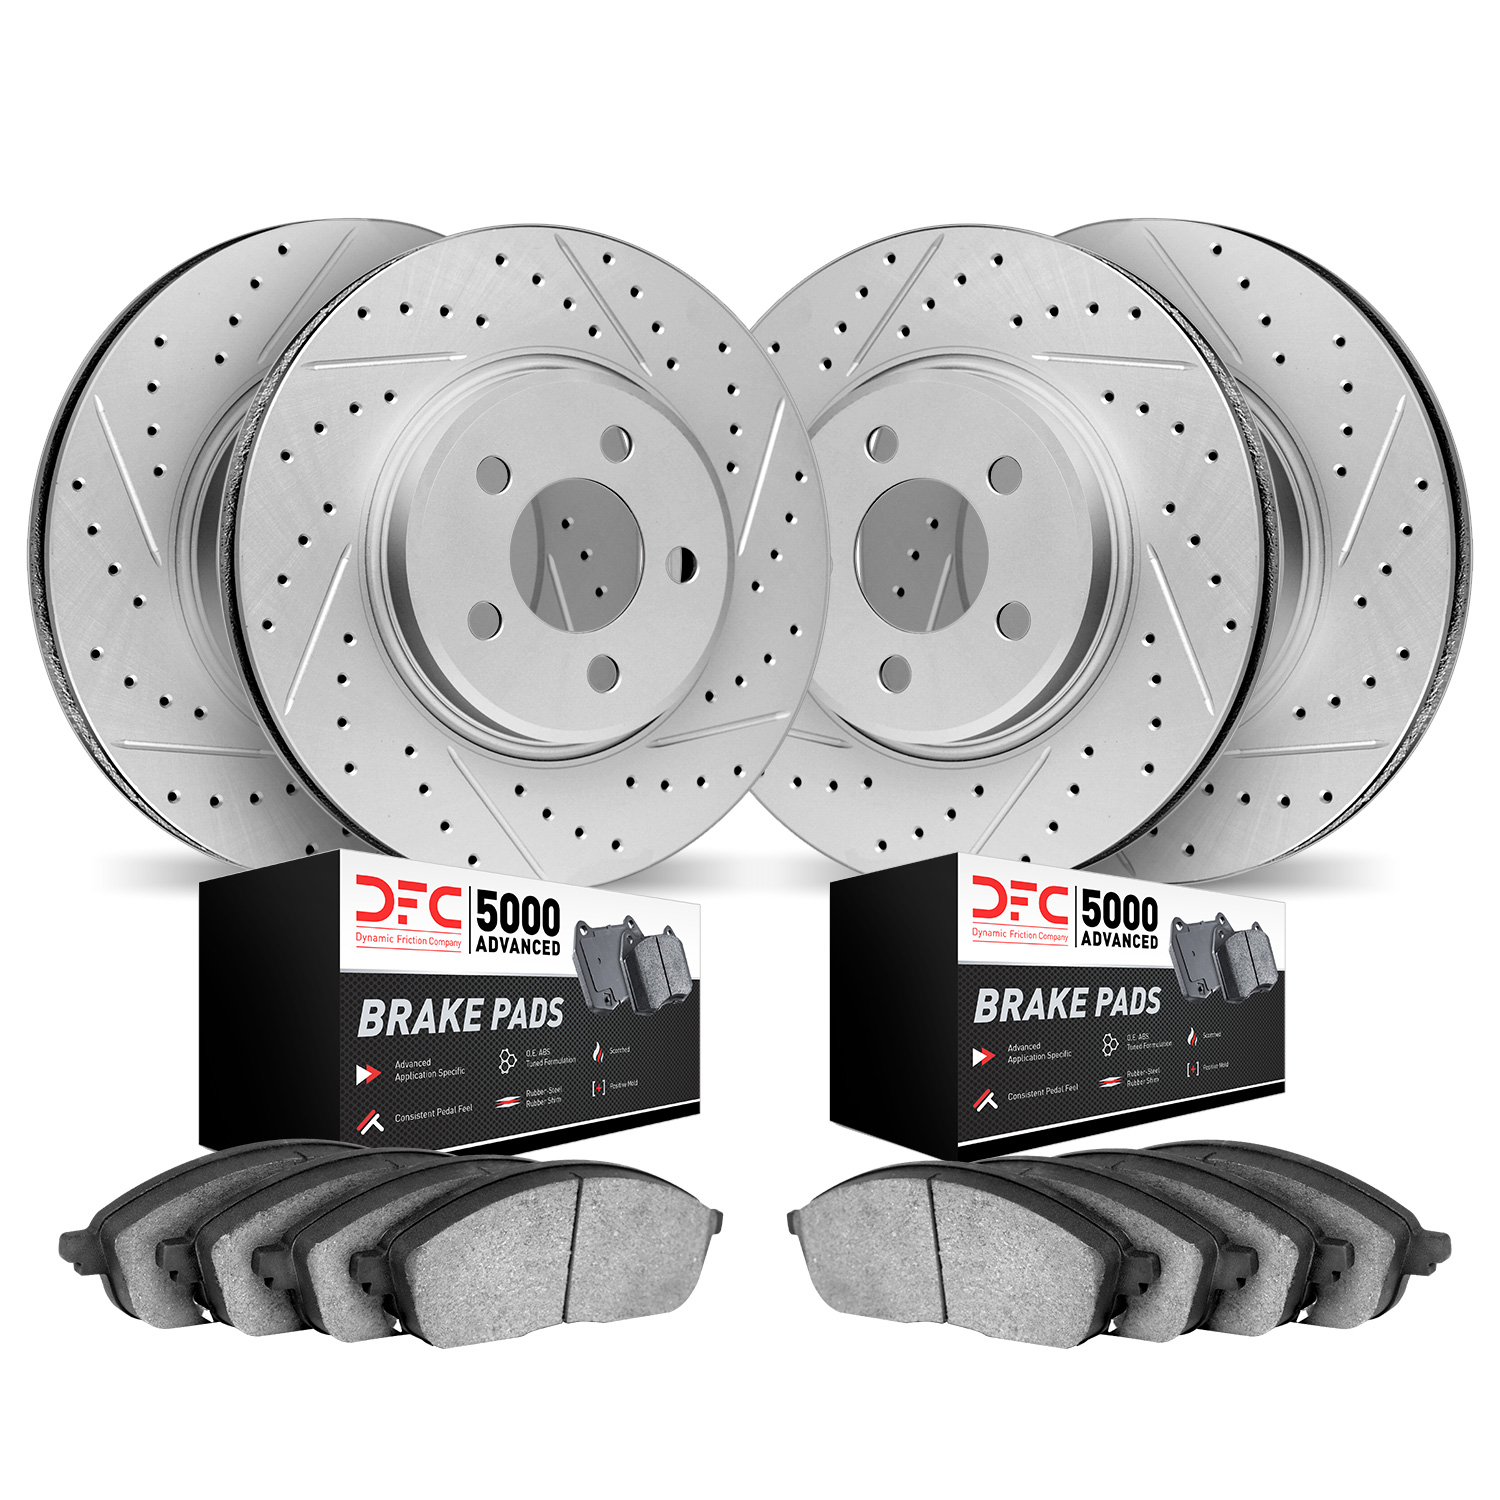 2504-40094 Geoperformance Drilled/Slotted Rotors w/5000 Advanced Brake Pads Kit, 2002-2006 Mopar, Position: Front and Rear